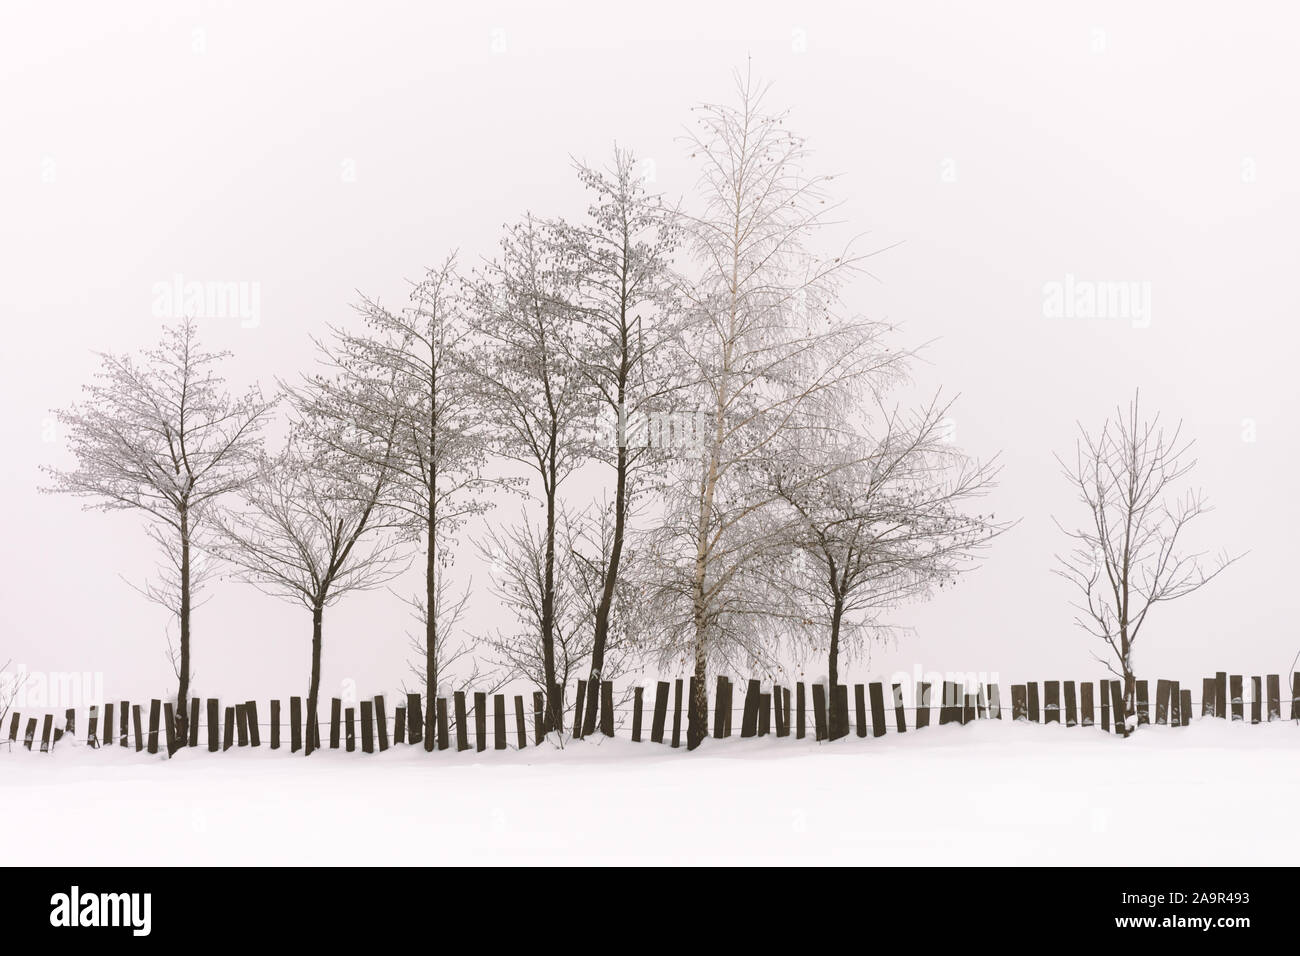 Minimalistic winter landscape in cloudy weather with snowy trees and wooden fence. Carpathian mountains, Landscape photography Stock Photo